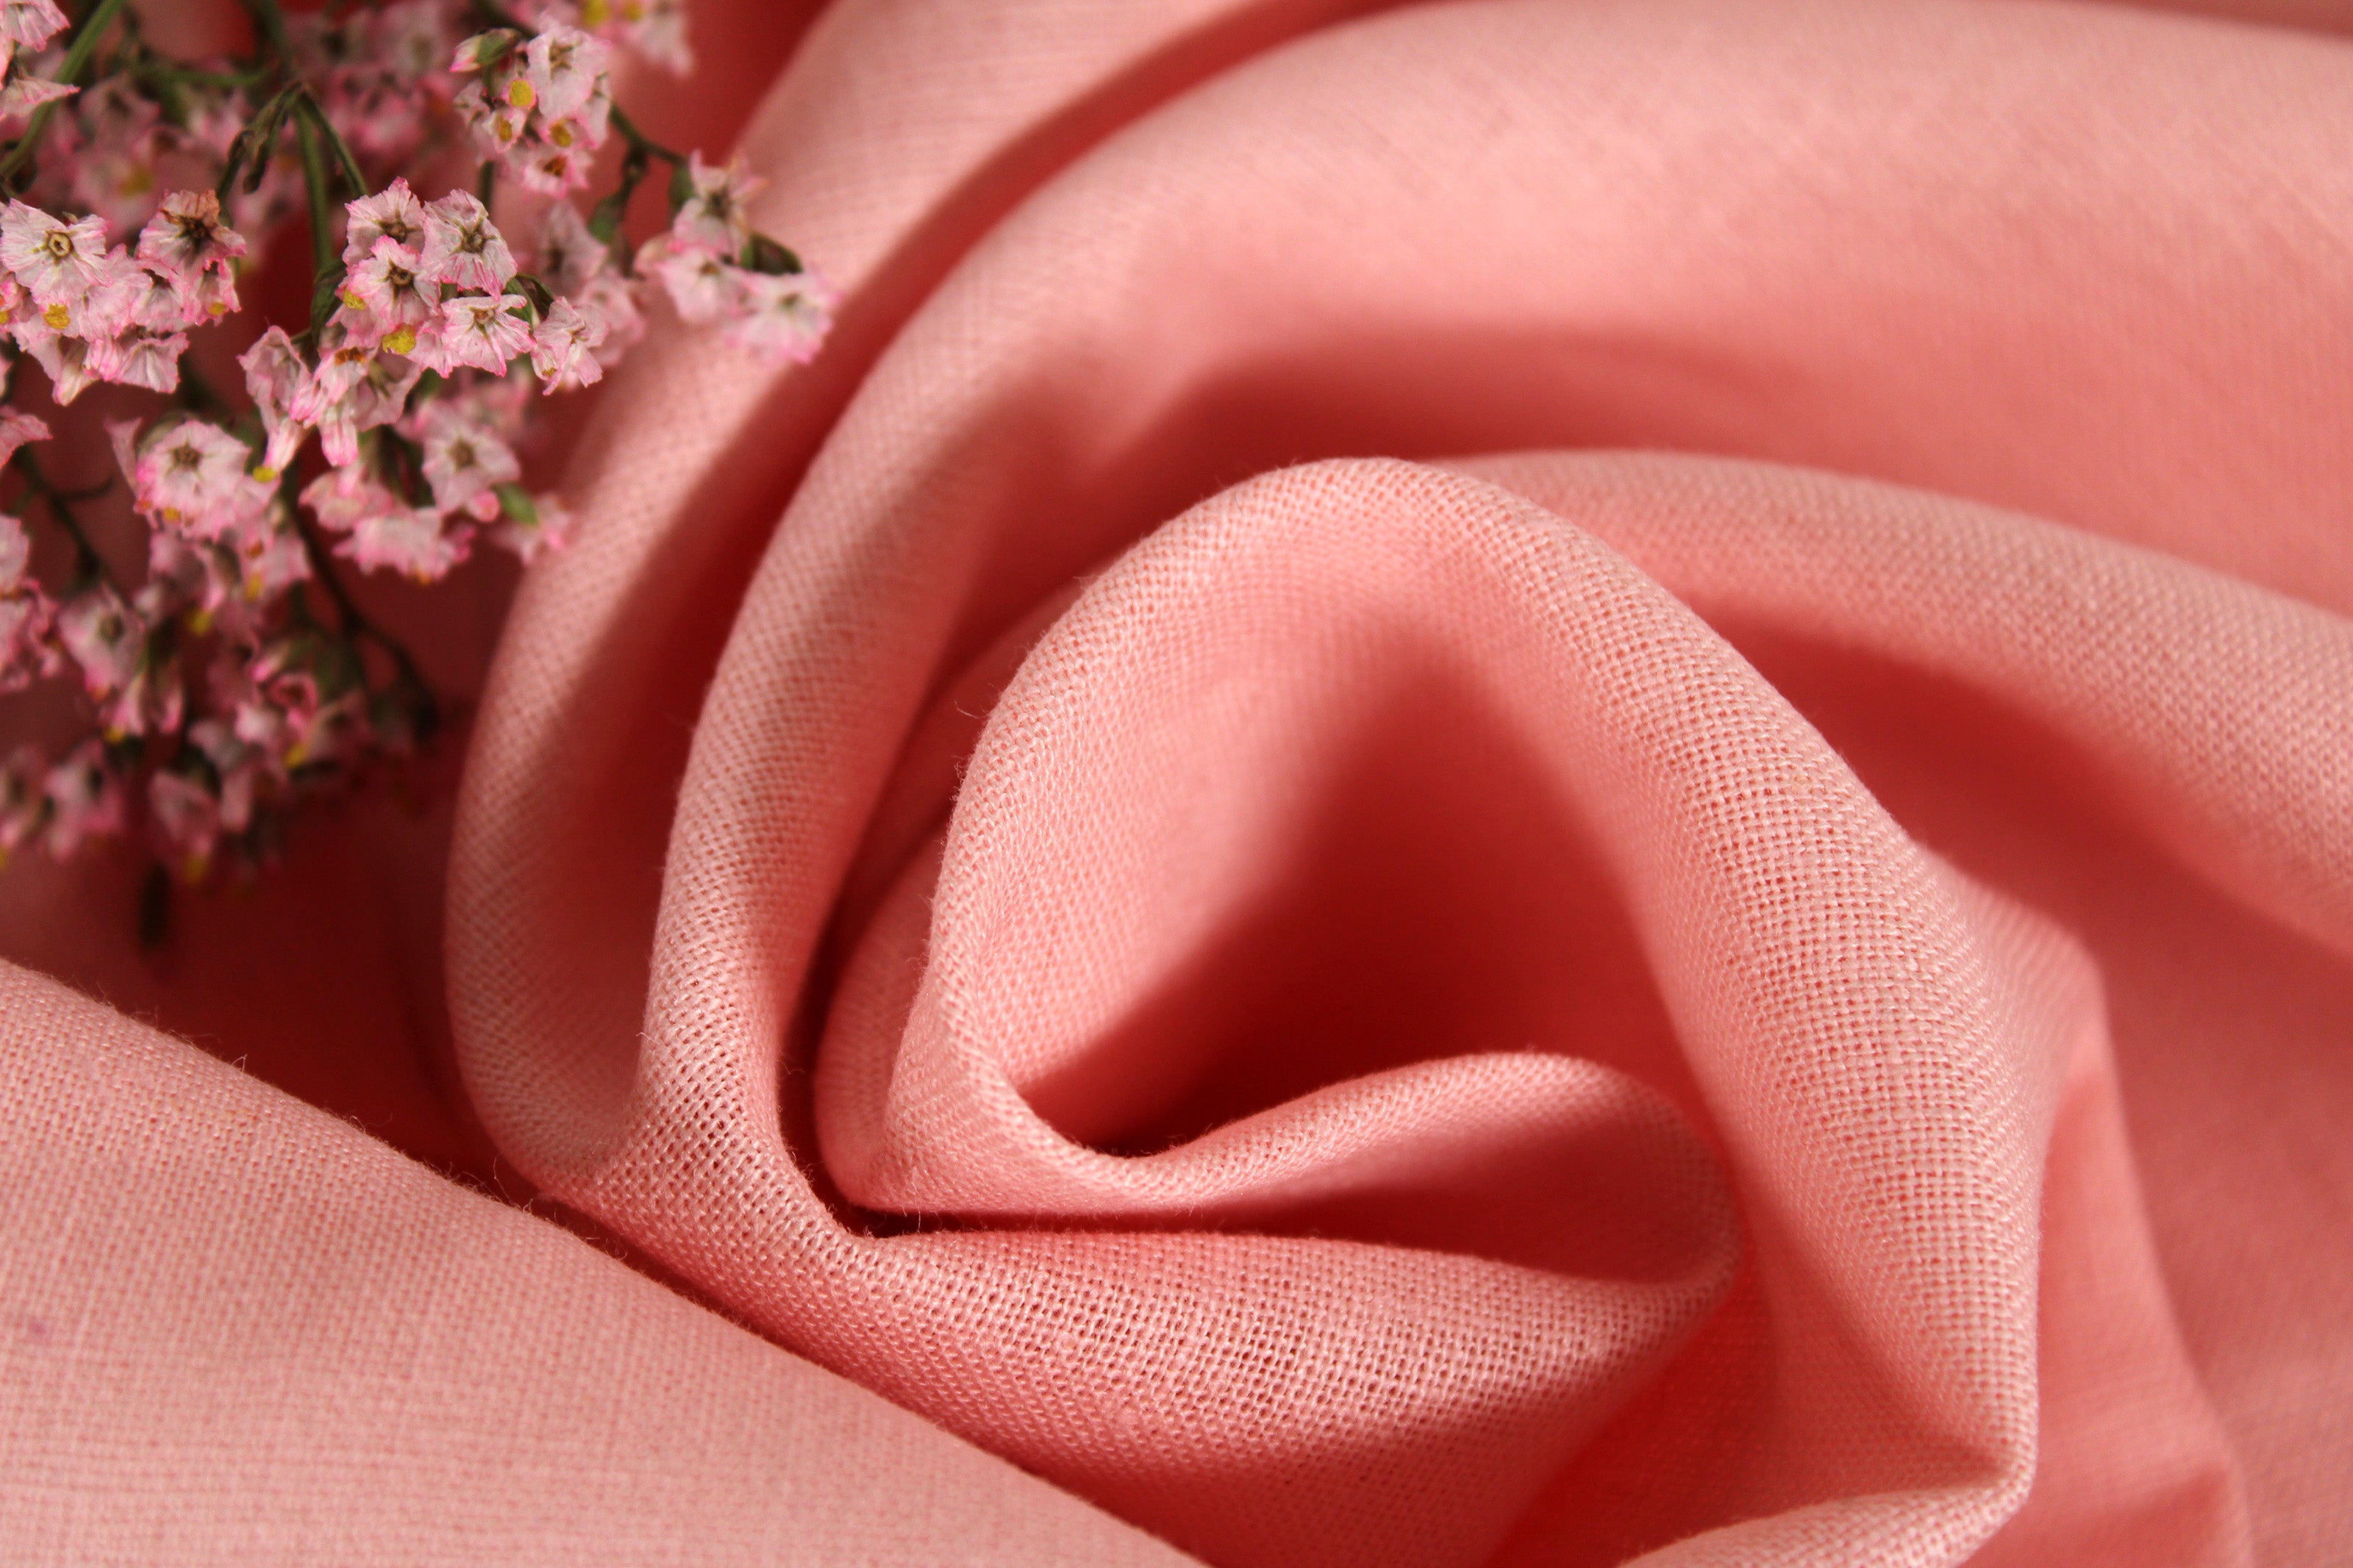 NEW LINEN FABRIC COLLECTION!!! / 100% Linen Fabric by the Yard / Blossom Linen Fabric / Buy Linen Online